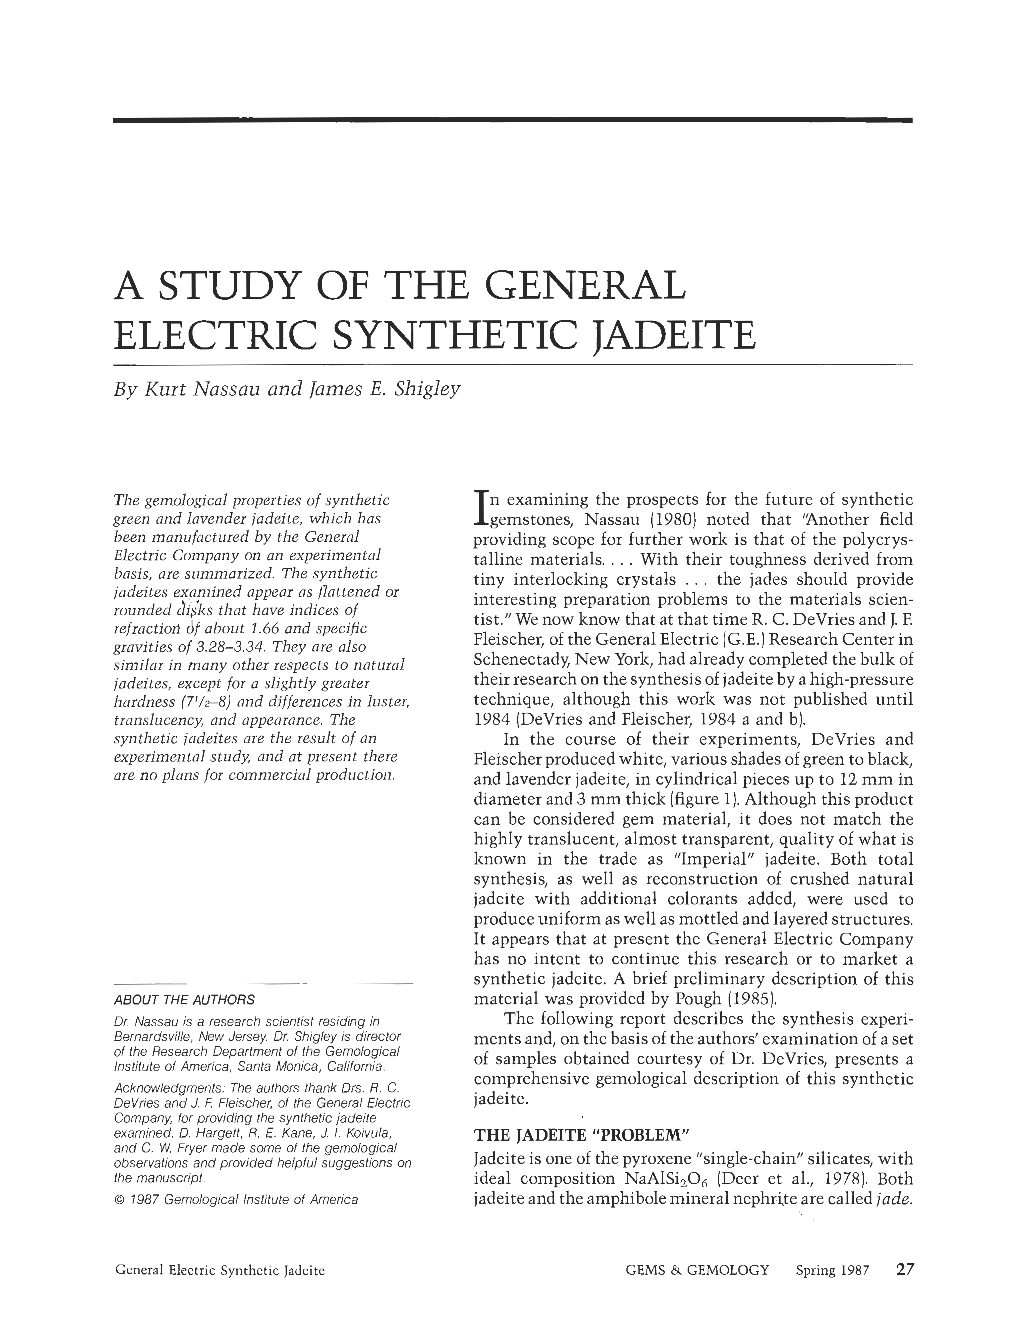 A STUDY of the GENERAL ELECTRIC SYNTHETIC JADEITE -- by Kurt Nassazz and Lames E